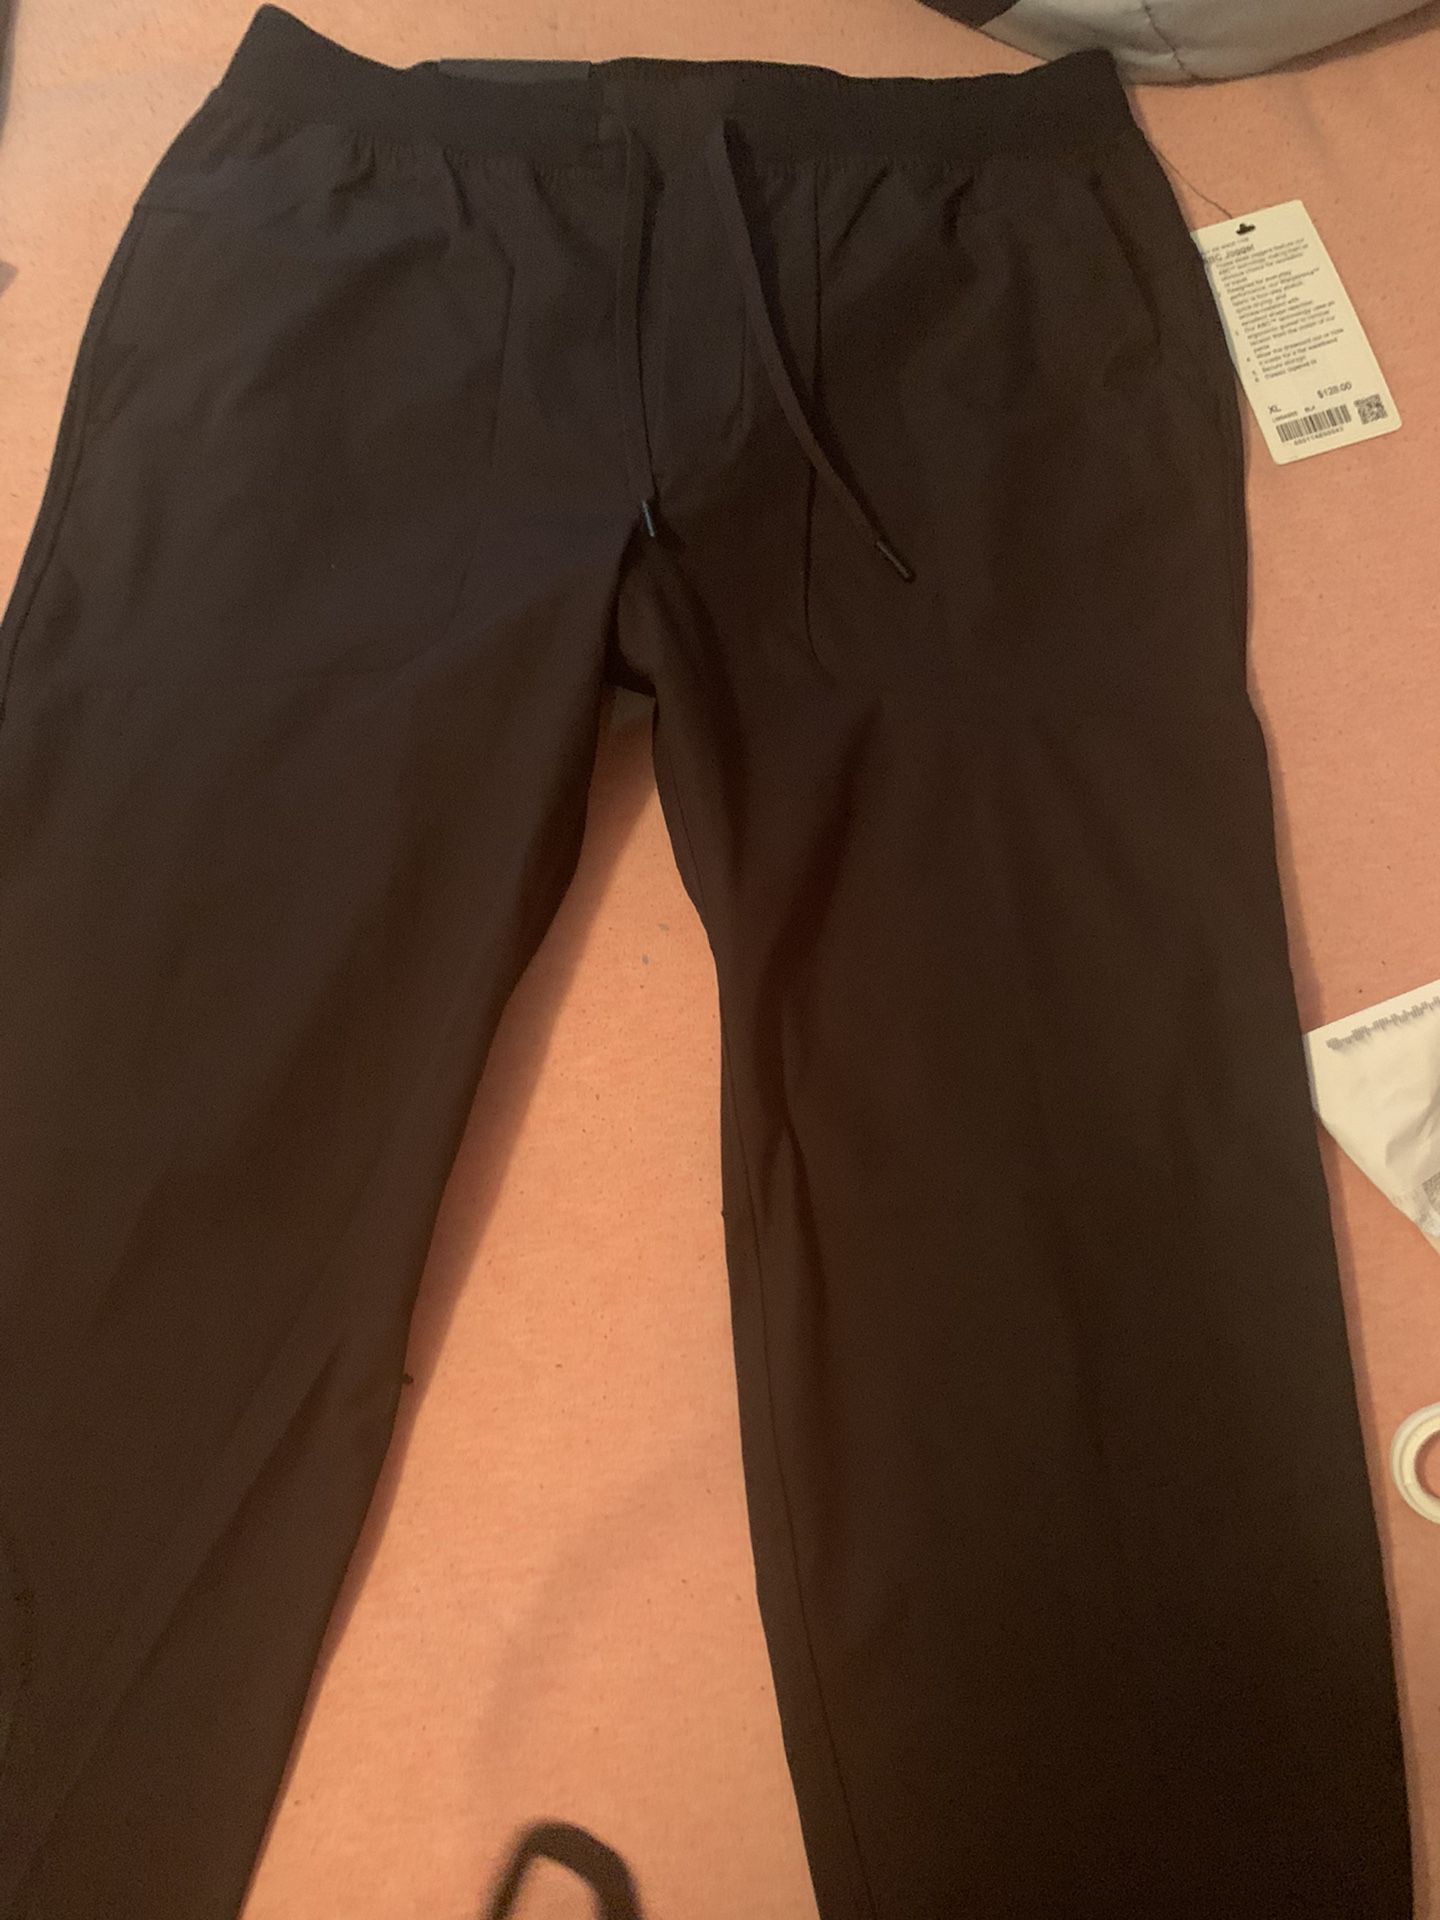 ABC Jogger Pants Brand New With Tags, Color - Black, Size- XL